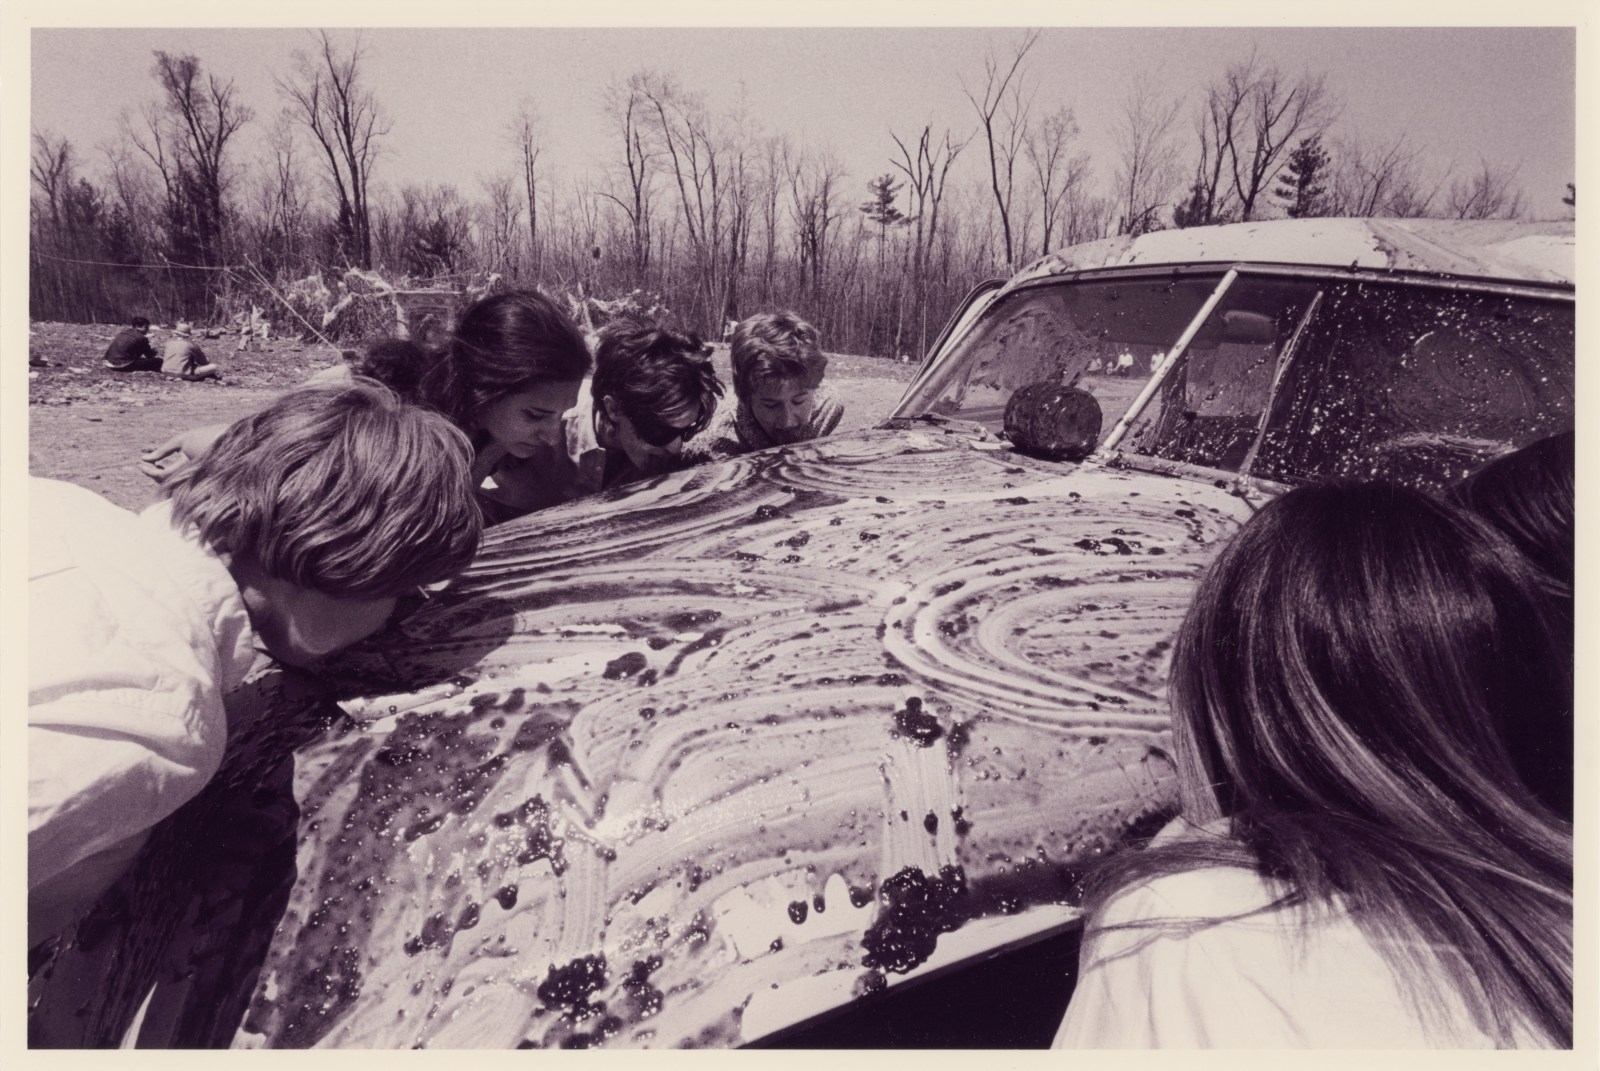 Sol Goldberg's photograph of women licking jam off a car in Allan Kaprow's Household 1964 © The Estate of Sol Goldberg/ Getty Research Institute, Los Angeles